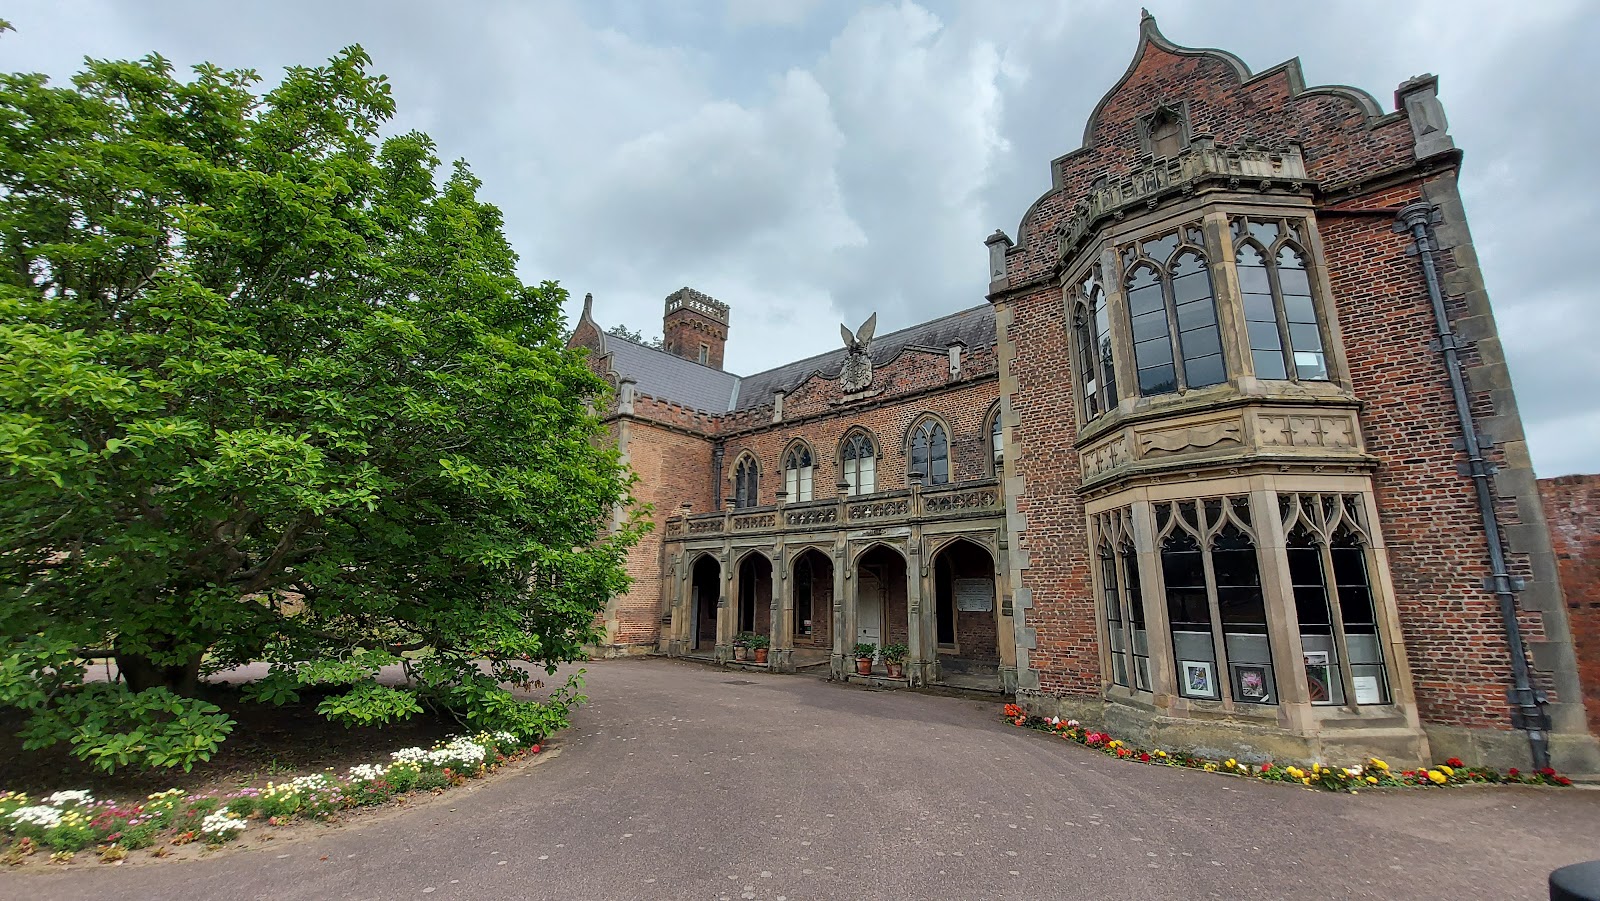 https://whatremovals.co.uk/wp-content/uploads/2022/02/Ayscoughfee Hall Museum and Gardens-300x169.jpeg